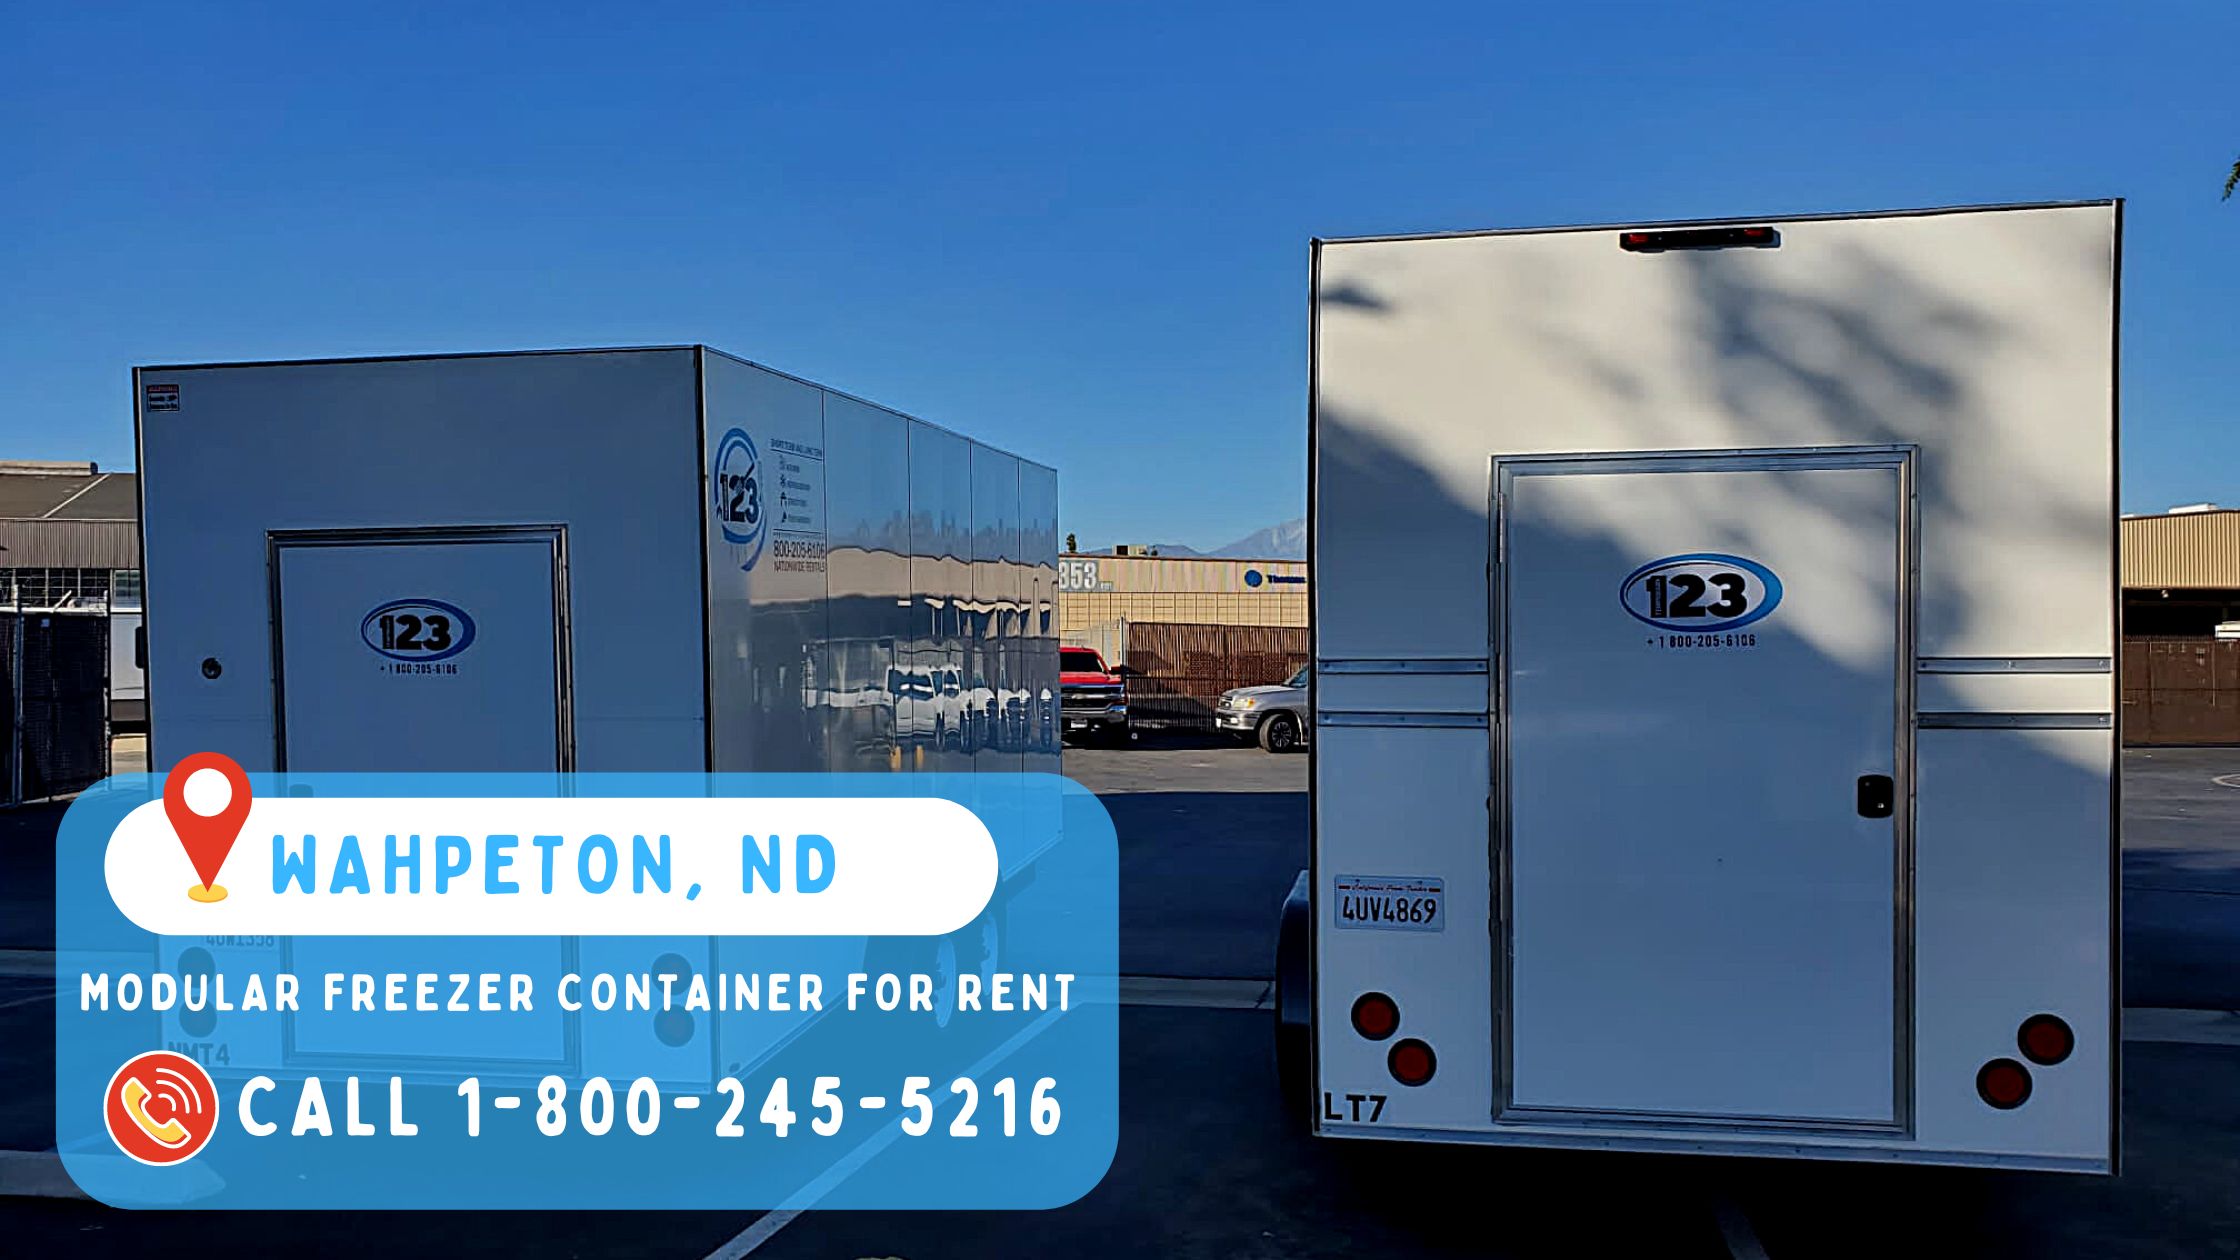 Modular Freezer Container for Rent in Wahpeton